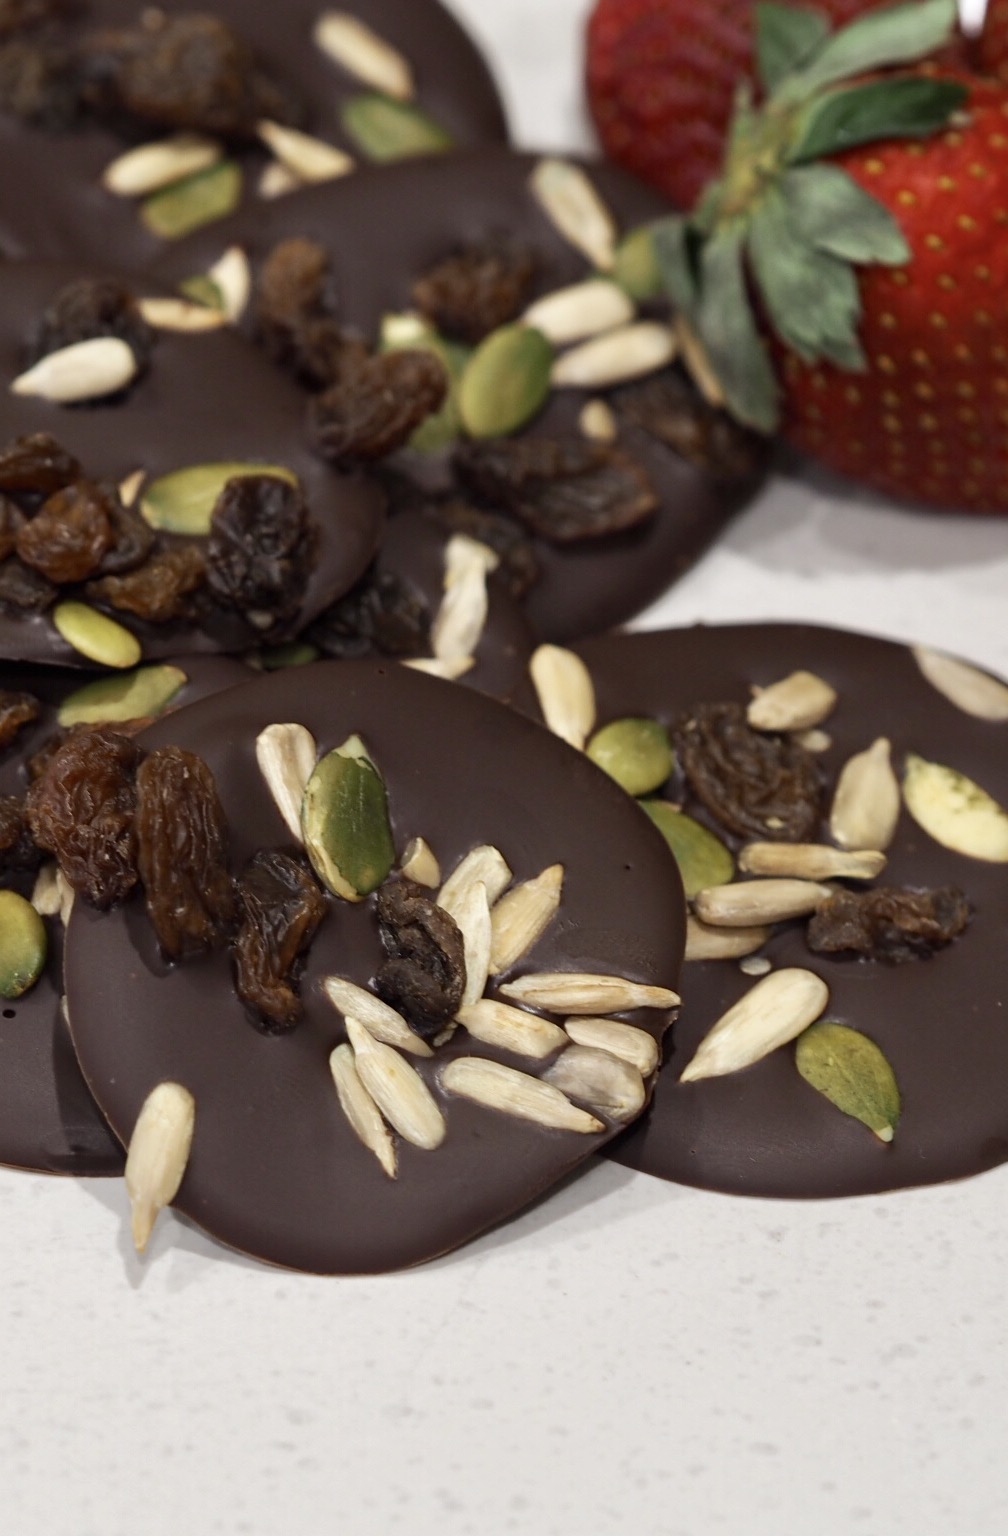 Dark Chocolate and Seed Mix Discs